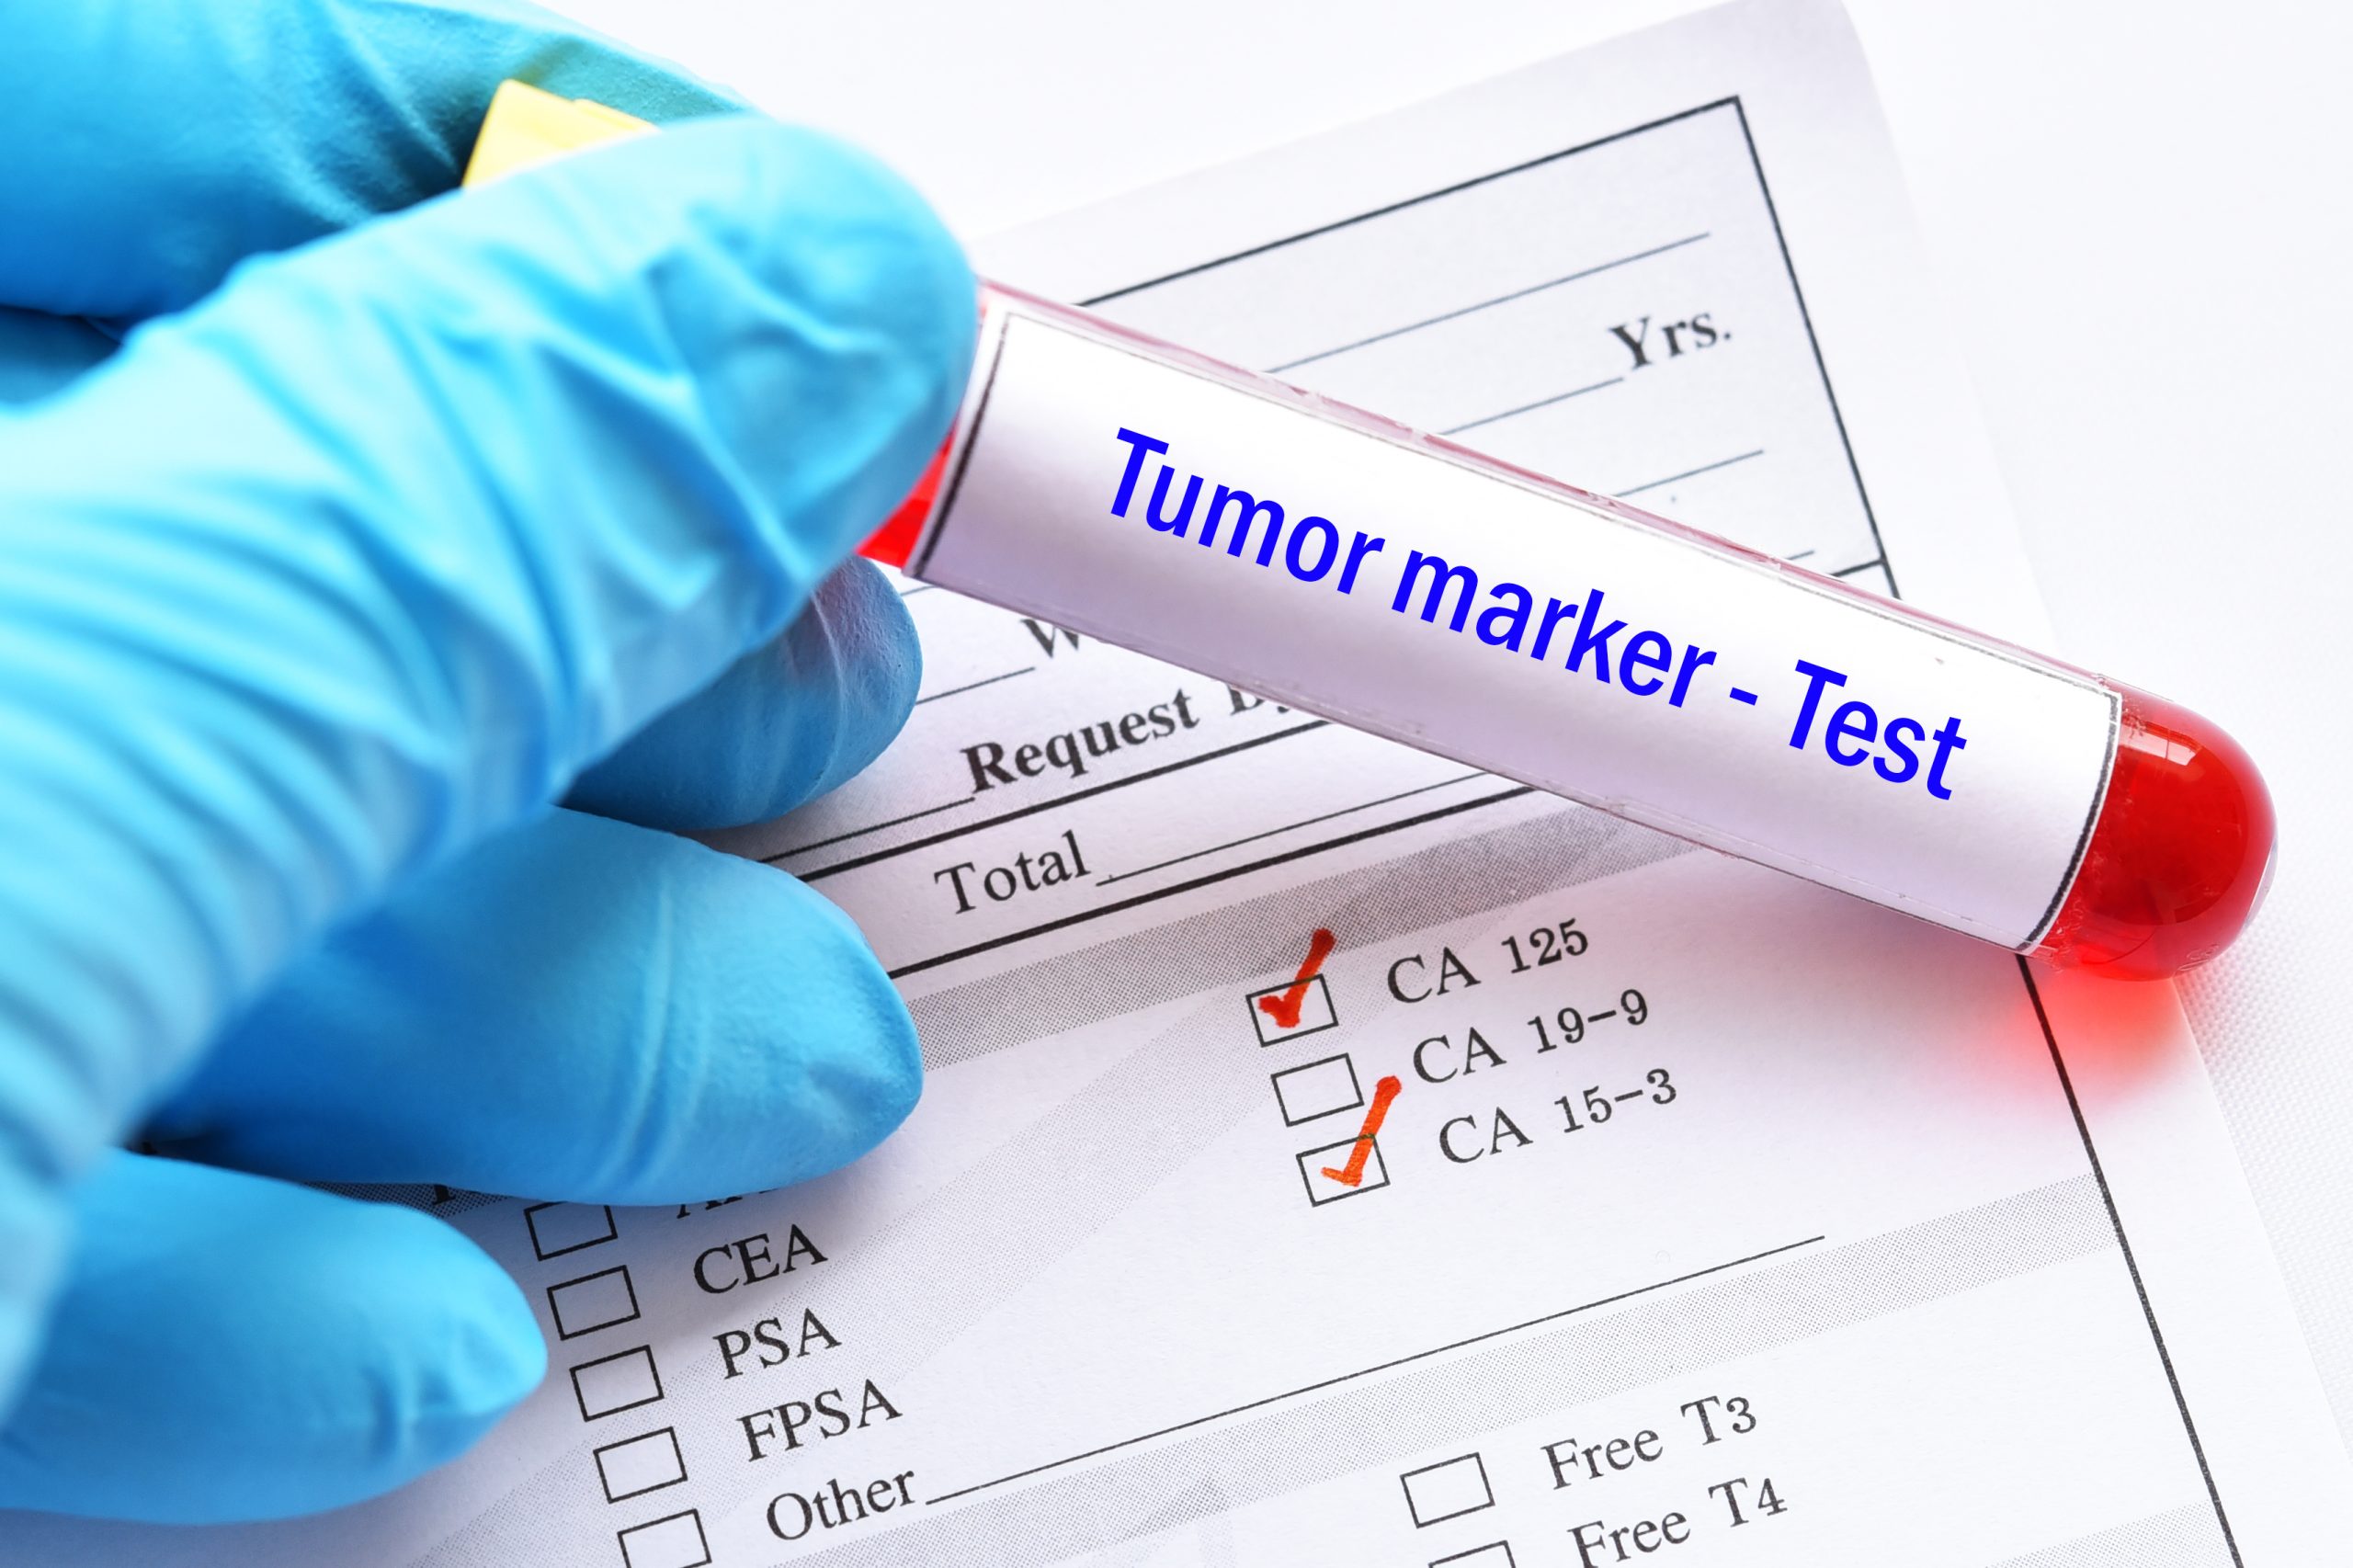 Prostate cancer: for targeted screening based on patient risk

